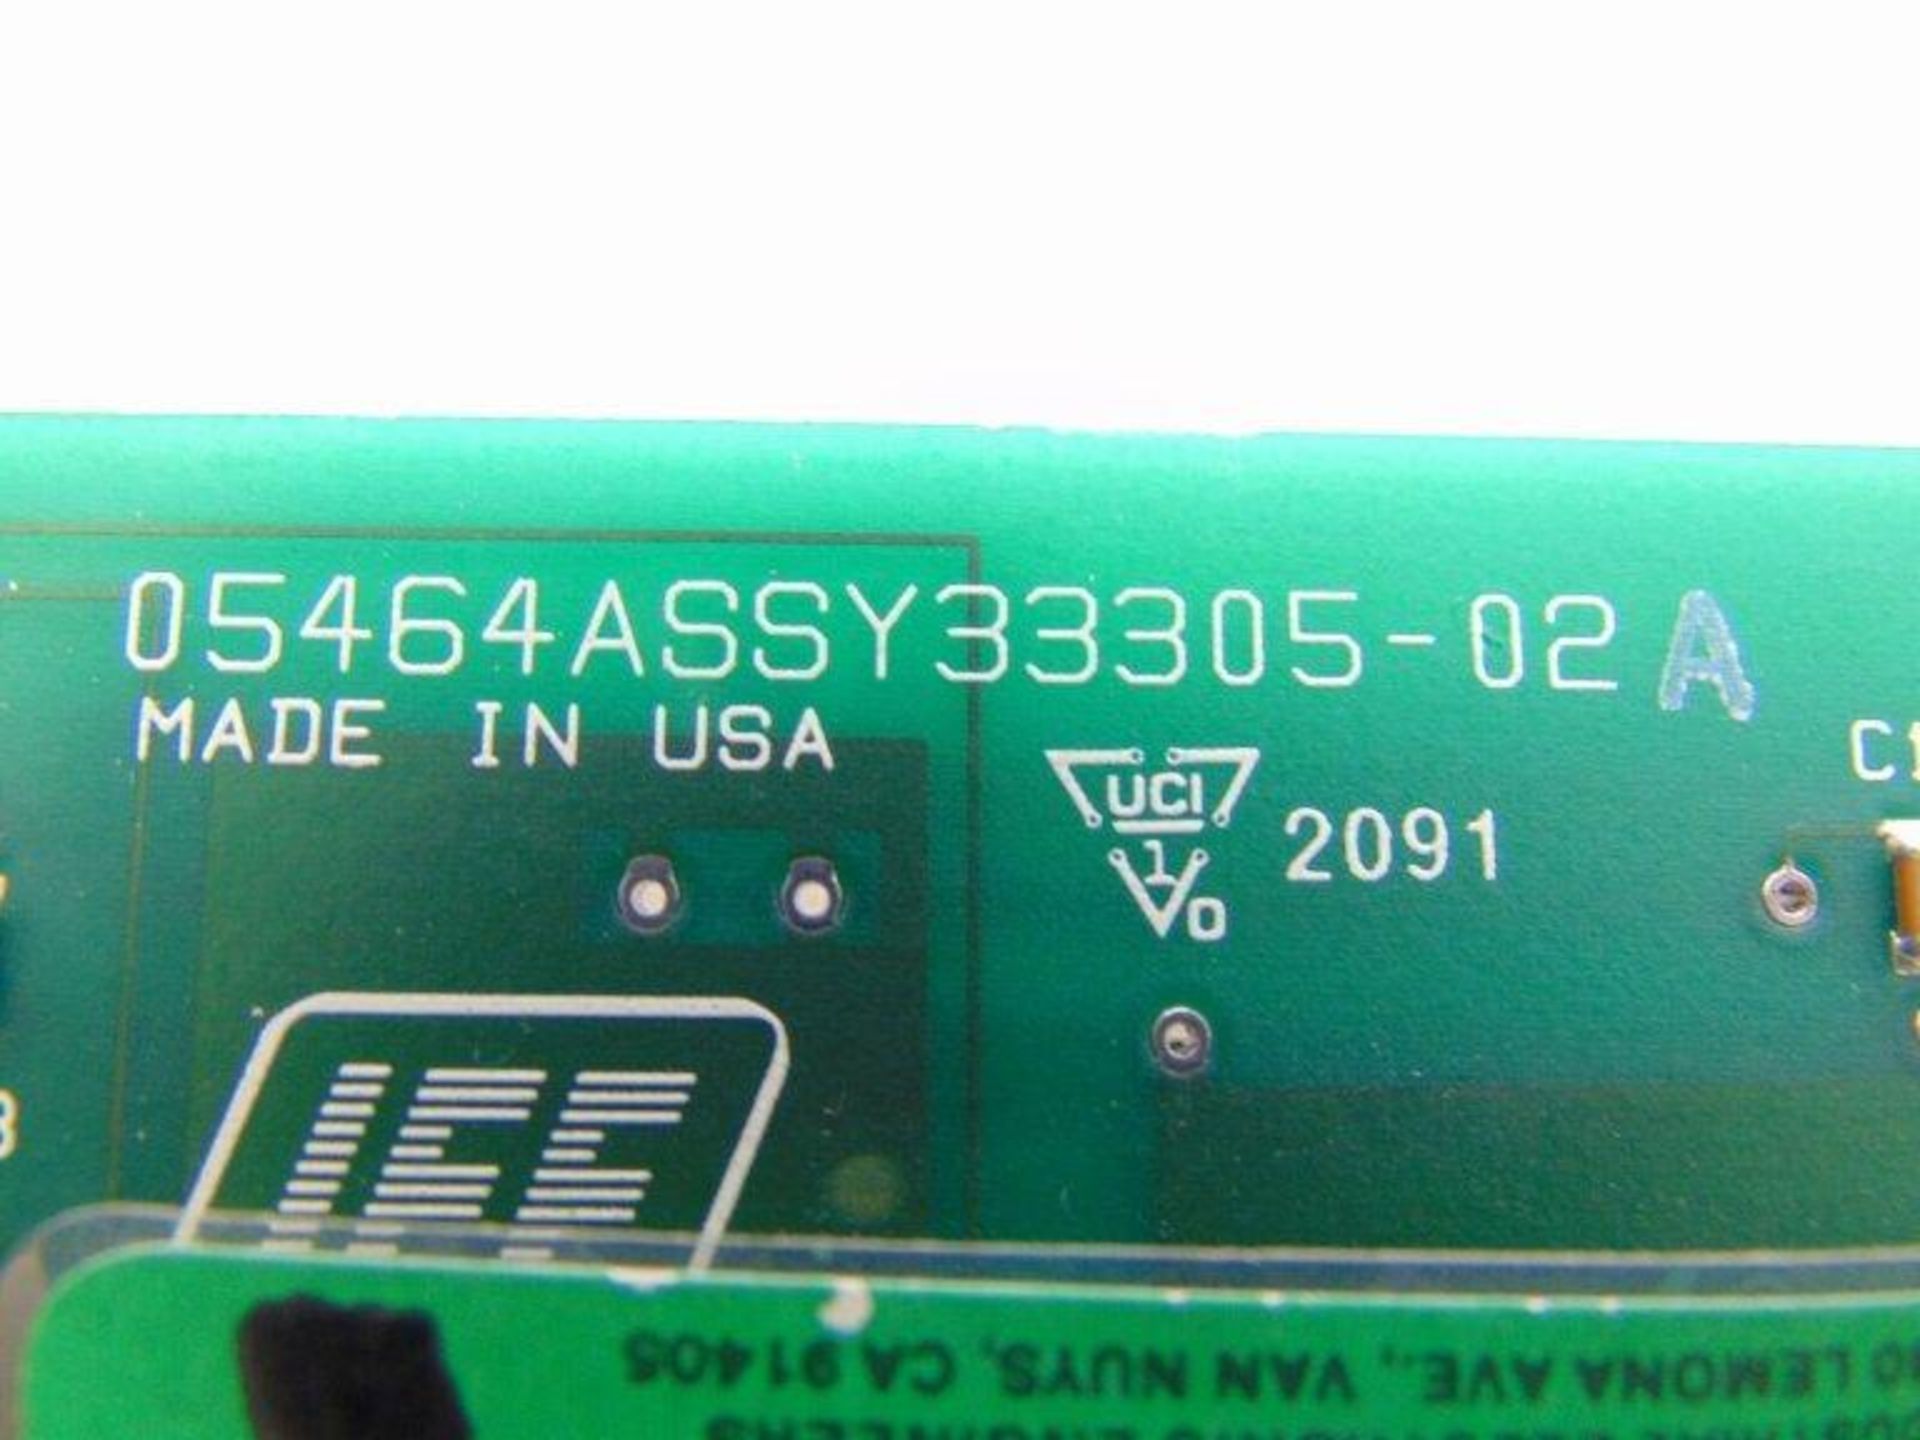 (10) IEE 05464ASSY33305-02A Display - Image 2 of 2